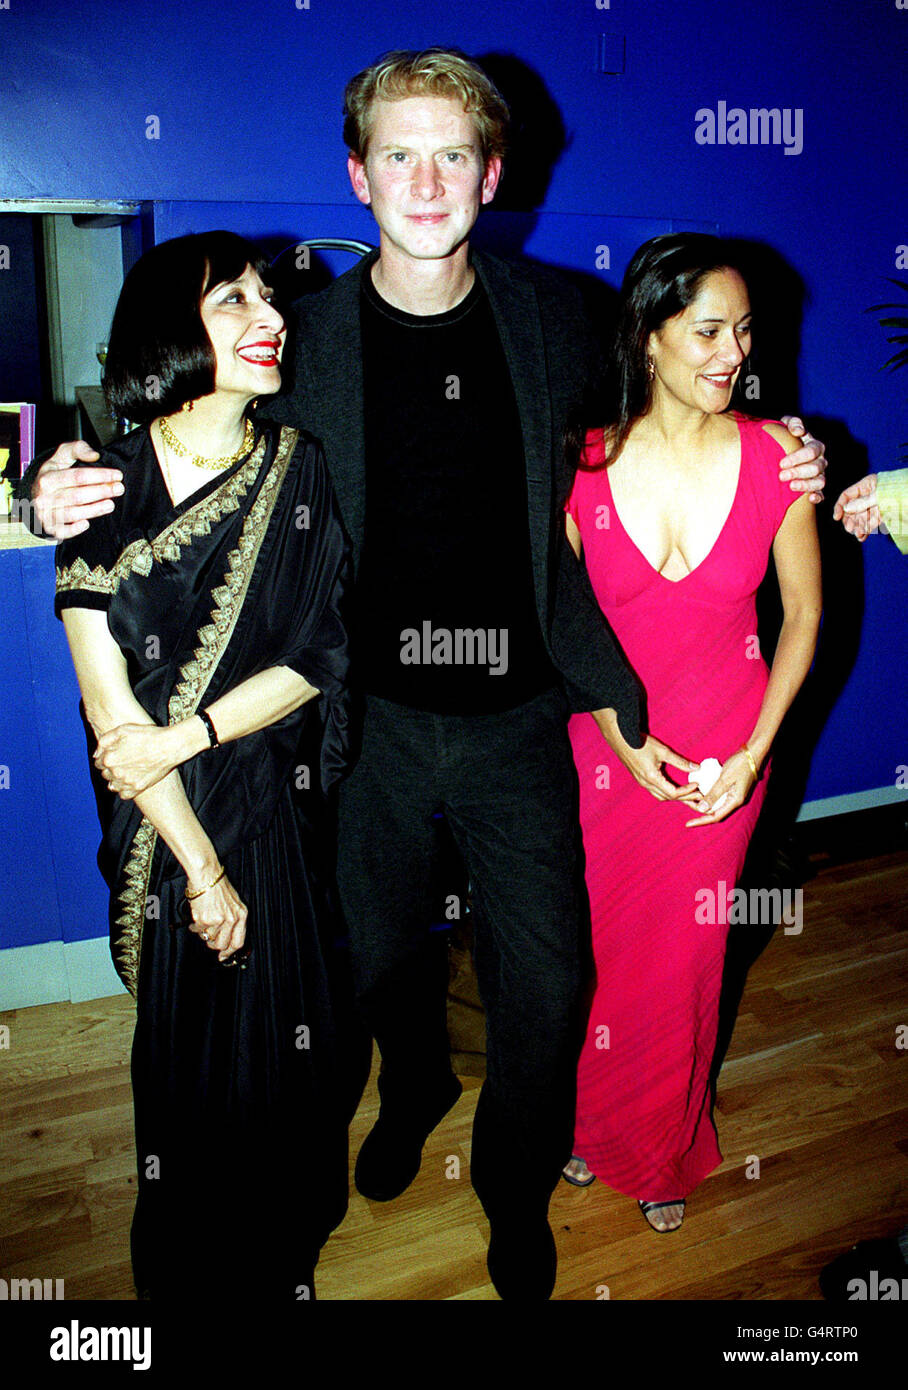 Actor James Wilby with actress and cookery expert Madhur Jaffrey (left), who both star in the film, at the Odeon Leicester Square, London, for the premiere of director Ismail Merchant 'Cotton Mary', set in post-colonial India during the 1950's. * Cotton Mary (Madhur Jaffrey) is an Anglo-Indian nurse who befriends ex-patriate Lily Mackintosh (Greta Scacchi). Stock Photo